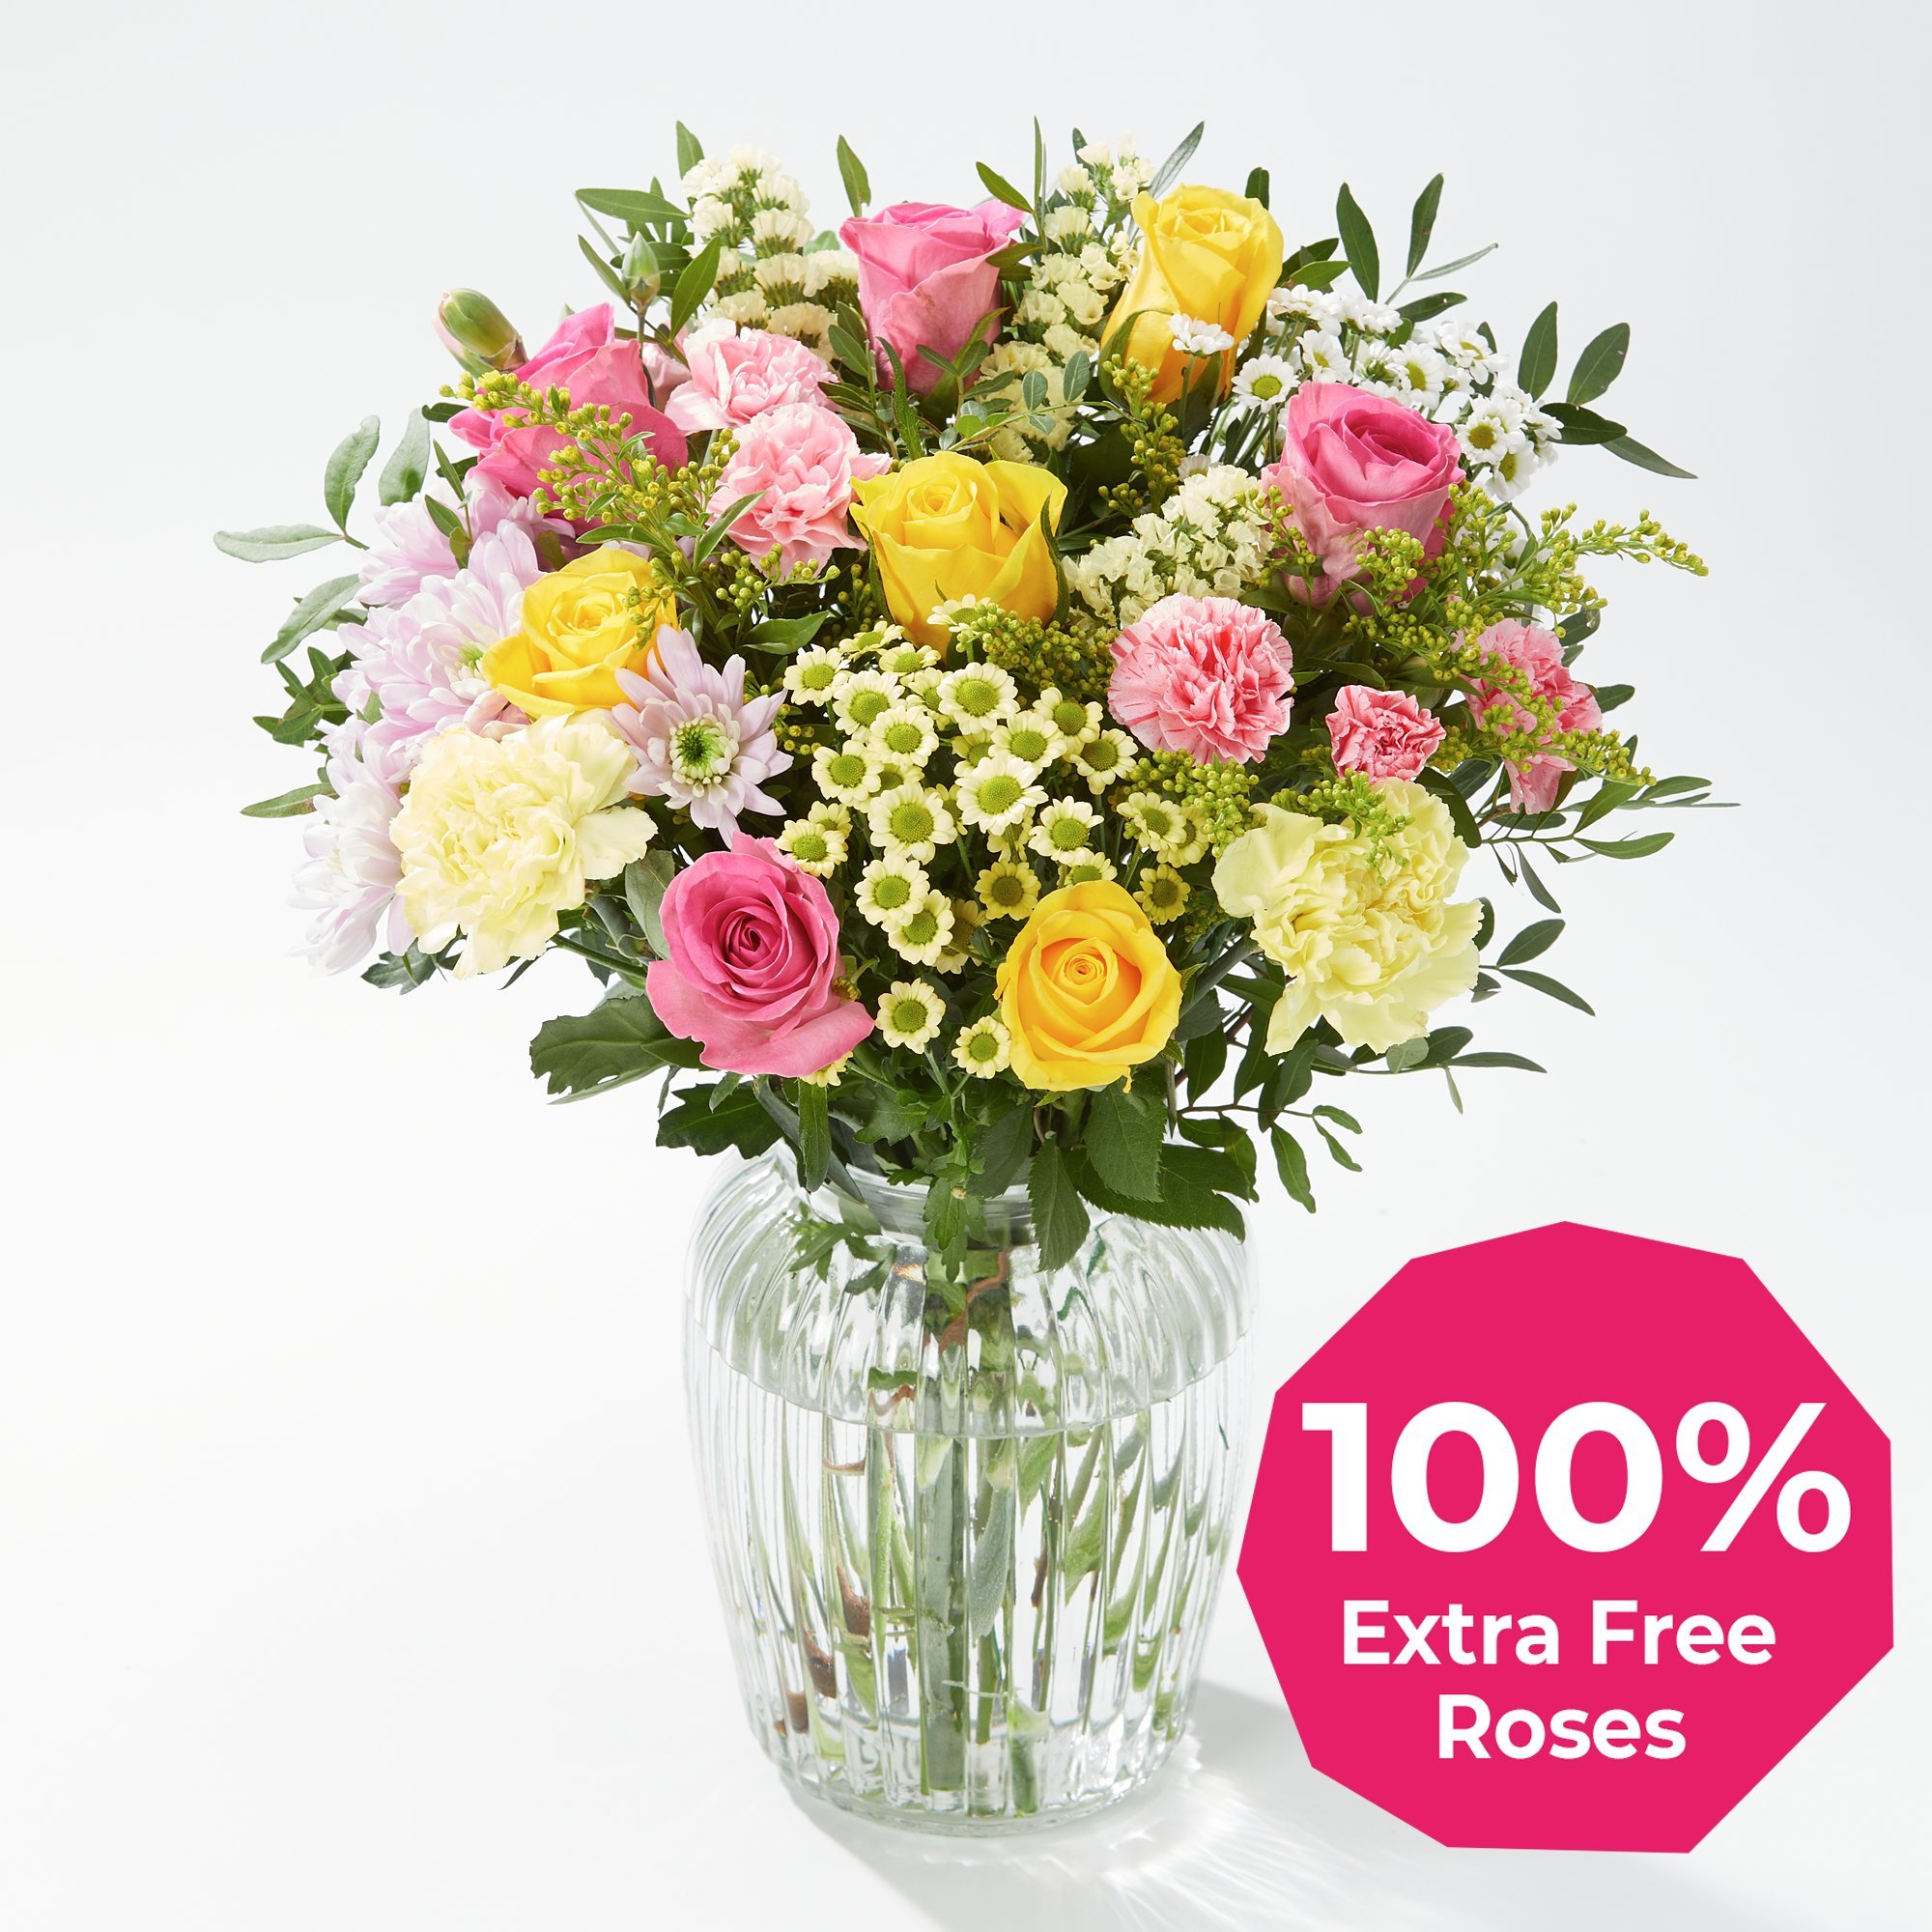 Perfectly Pretty Mum - 100% Extra Free Roses